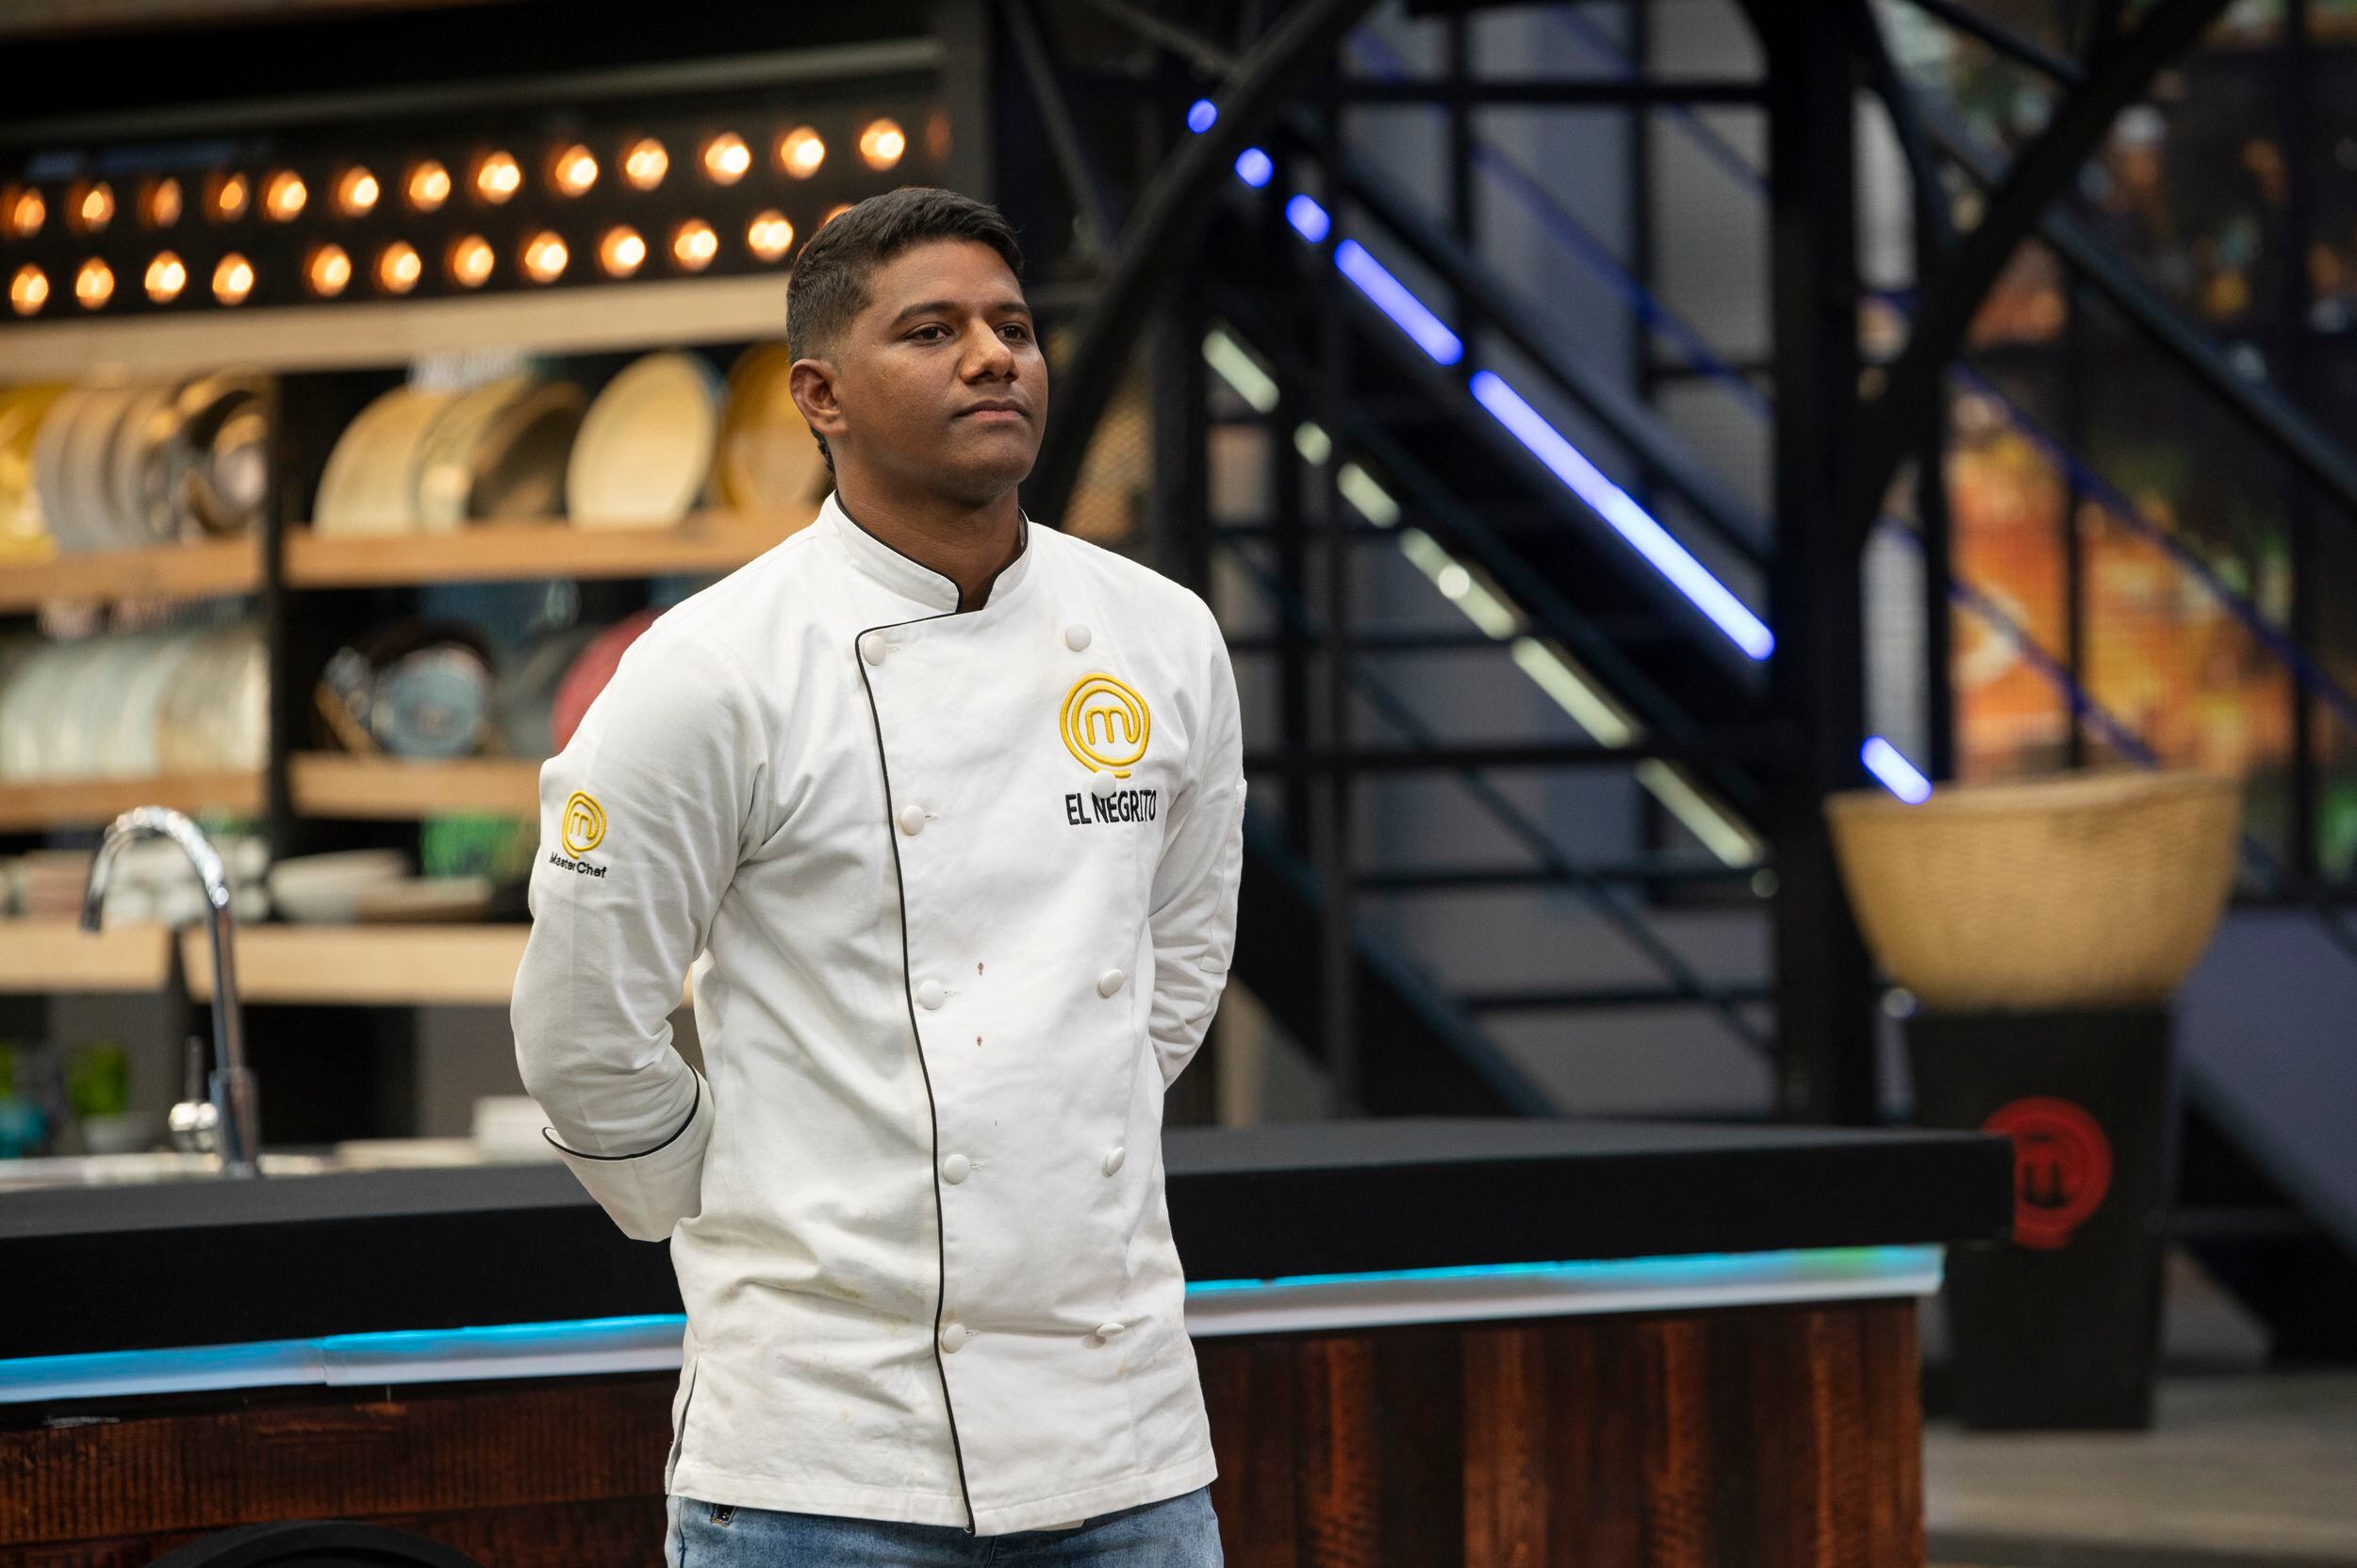 'El Negrito' spoke about the discussions he had with some colleagues on MasterChef - credit courtesy of Canal RCN